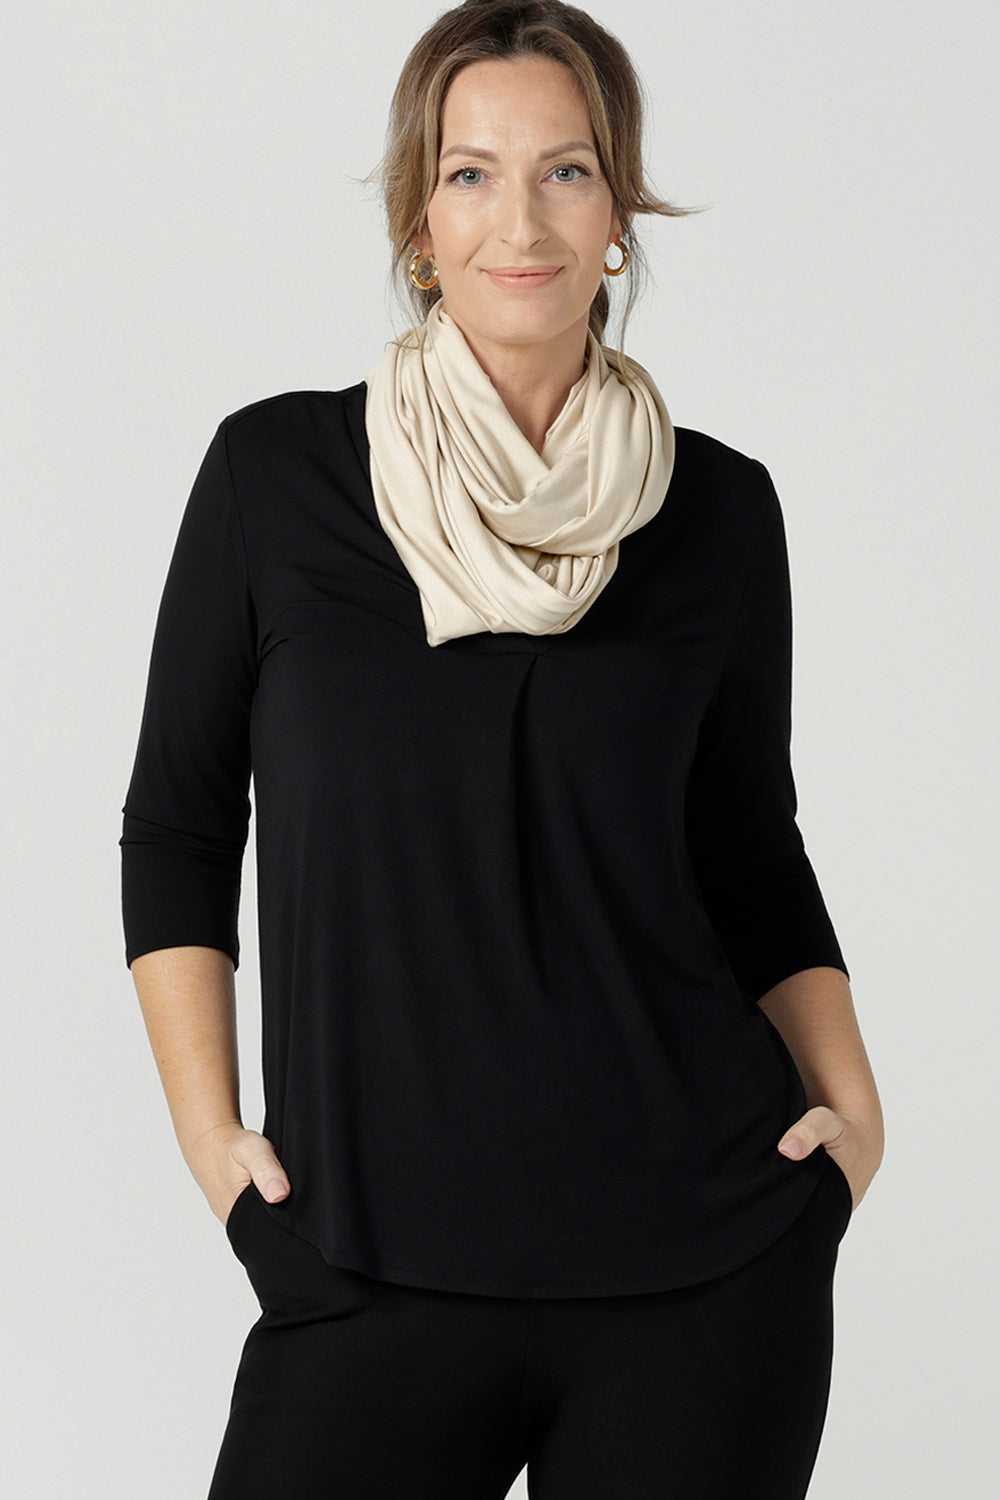 complete your capsule wardrobe for work, travel and play with this Infinity Scarf in luxurious and soft silt bamboo jersey.